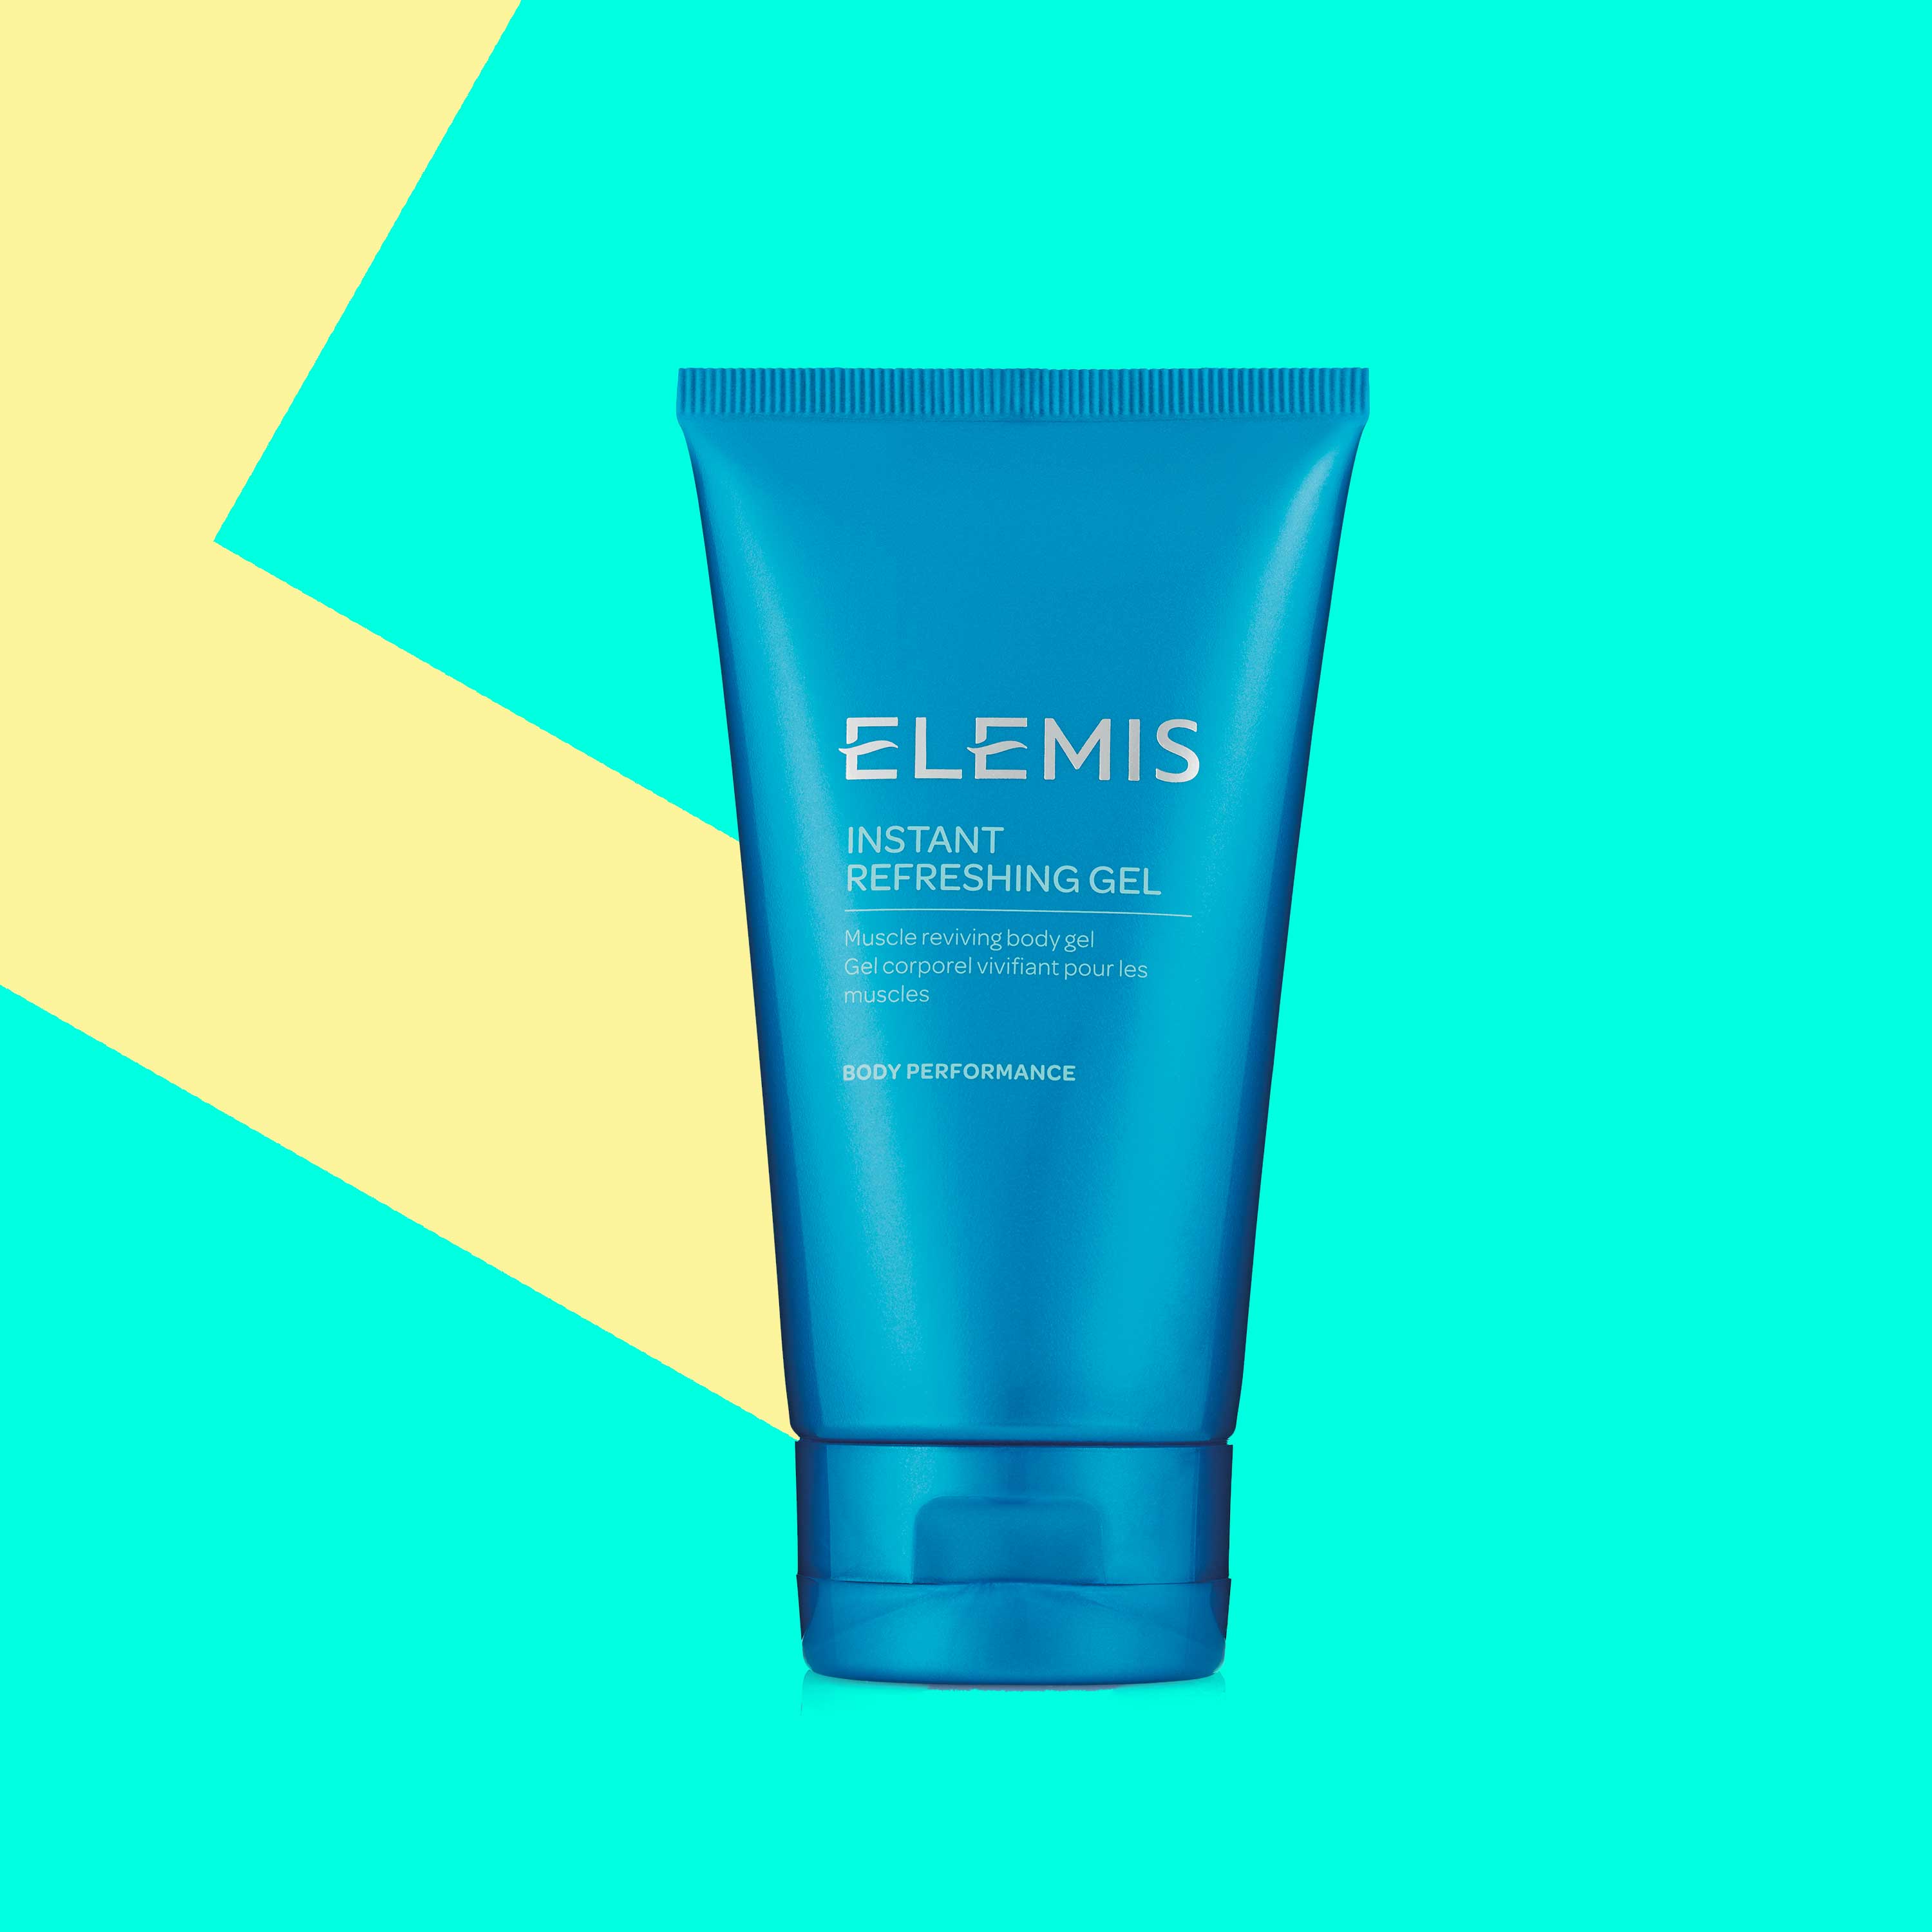 10 Cooling Products That Feel Like A Splash of Cold Water on the Skin